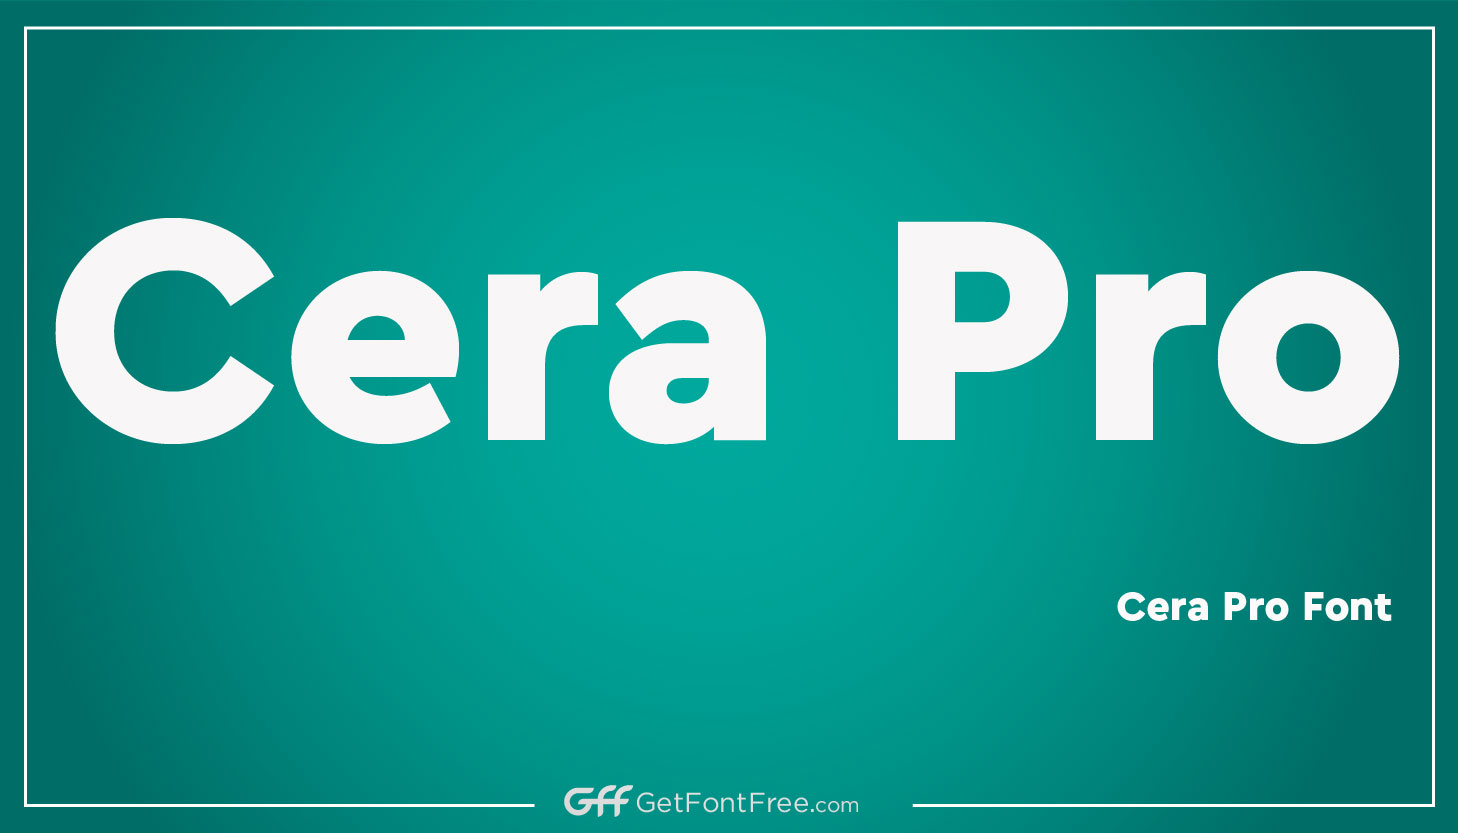 Cera Pro is a geometric sans-serif typeface designed by Dutch-type designer Jan Fromm. It features a clean, modern design with soft rounded edges that give it a friendly and approachable feel. The font family includes a variety of weights, from light to black, as well as a matching italic for each weight. The typeface has been designed for both digital and print design projects and is particularly well suited for use in headlines, titles, and other display use cases. The font family also includes a variety of OpenType features, such as small caps, subscripts and superscripts, fractions, and ligatures, which make it highly versatile and useful for a wide range of design projects.